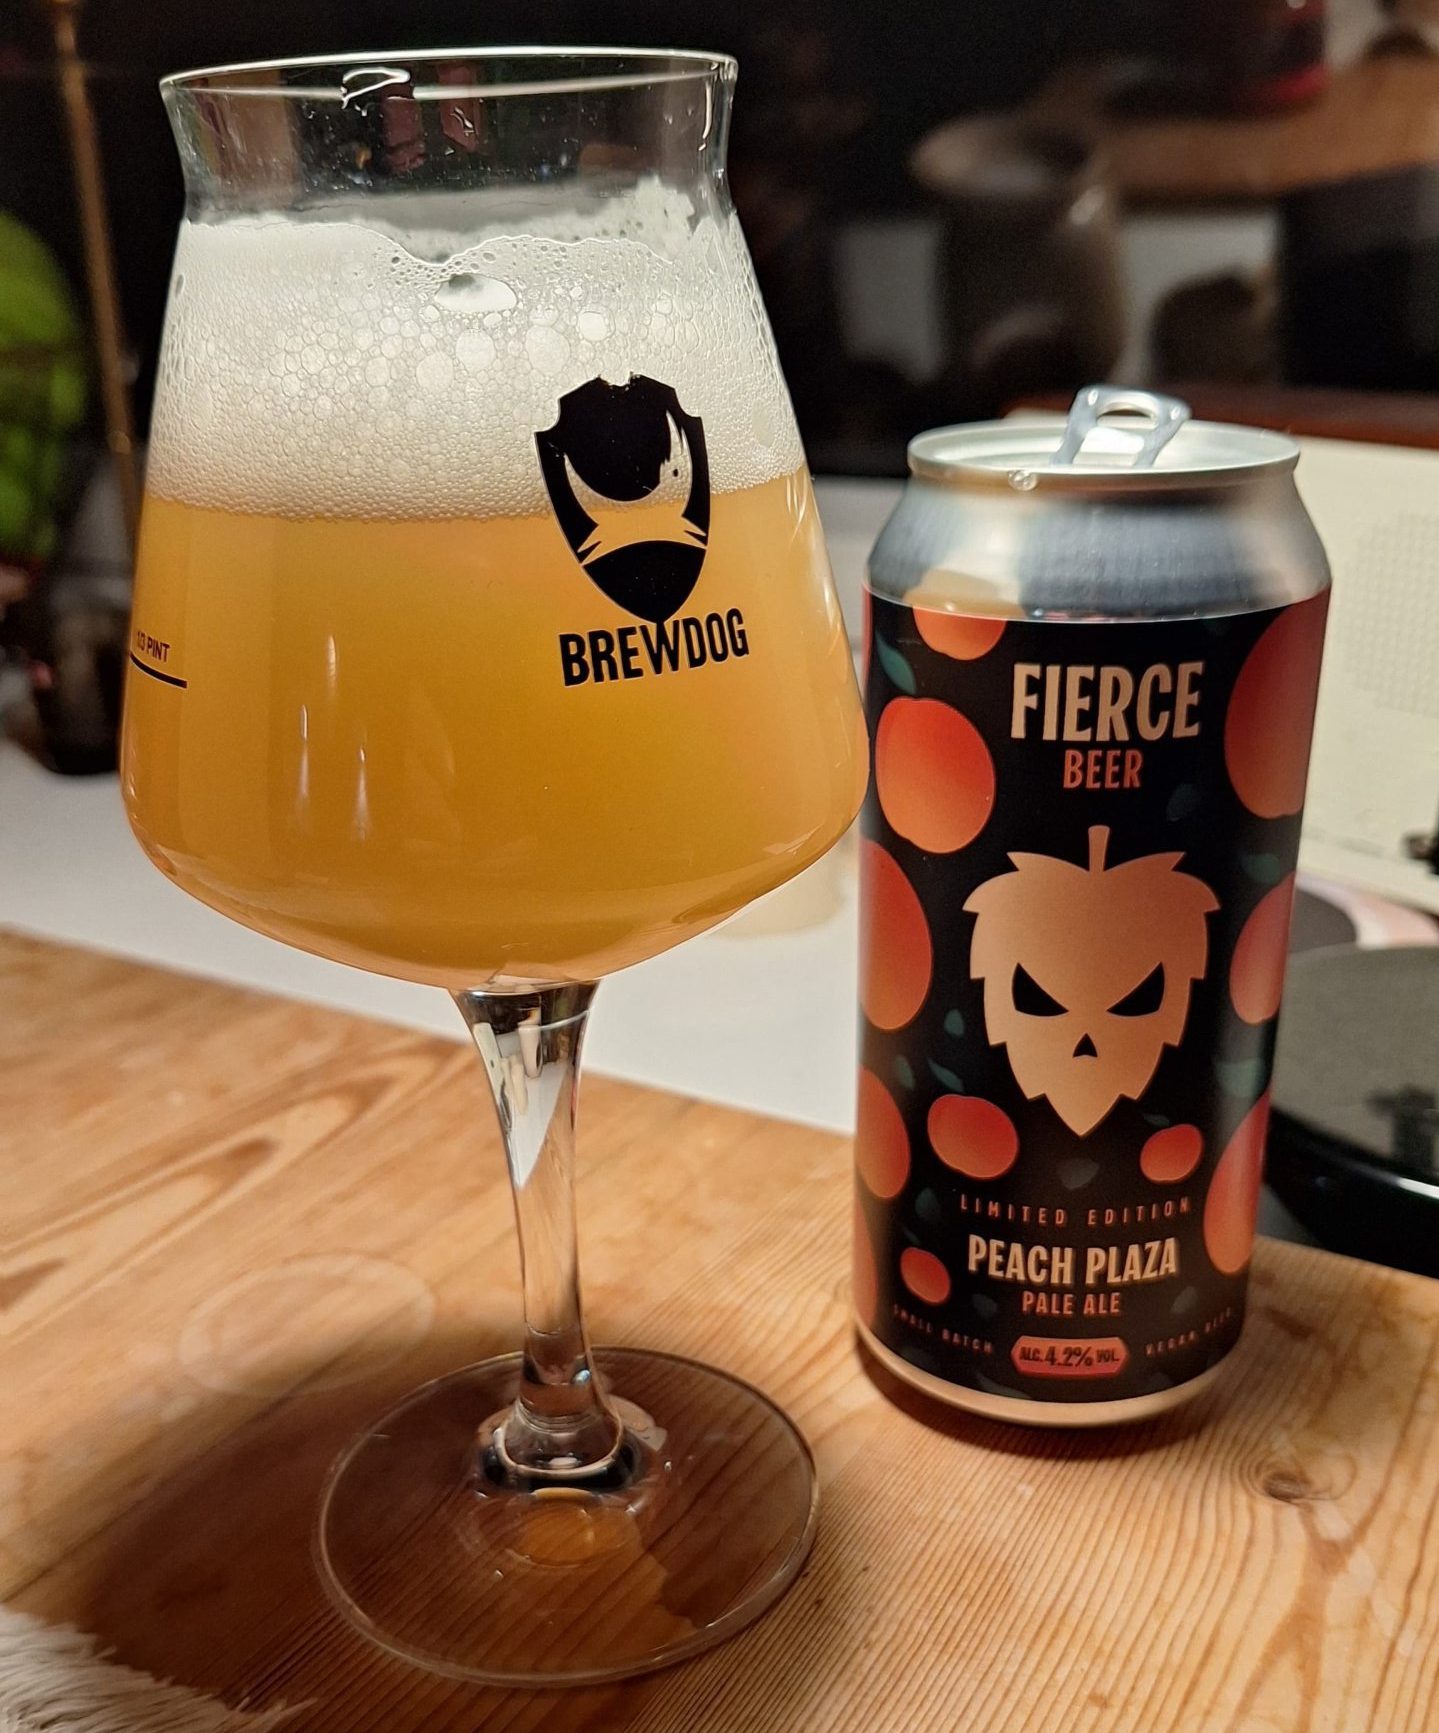 Fierce Beer's Peach Plaza poured out into a glass.